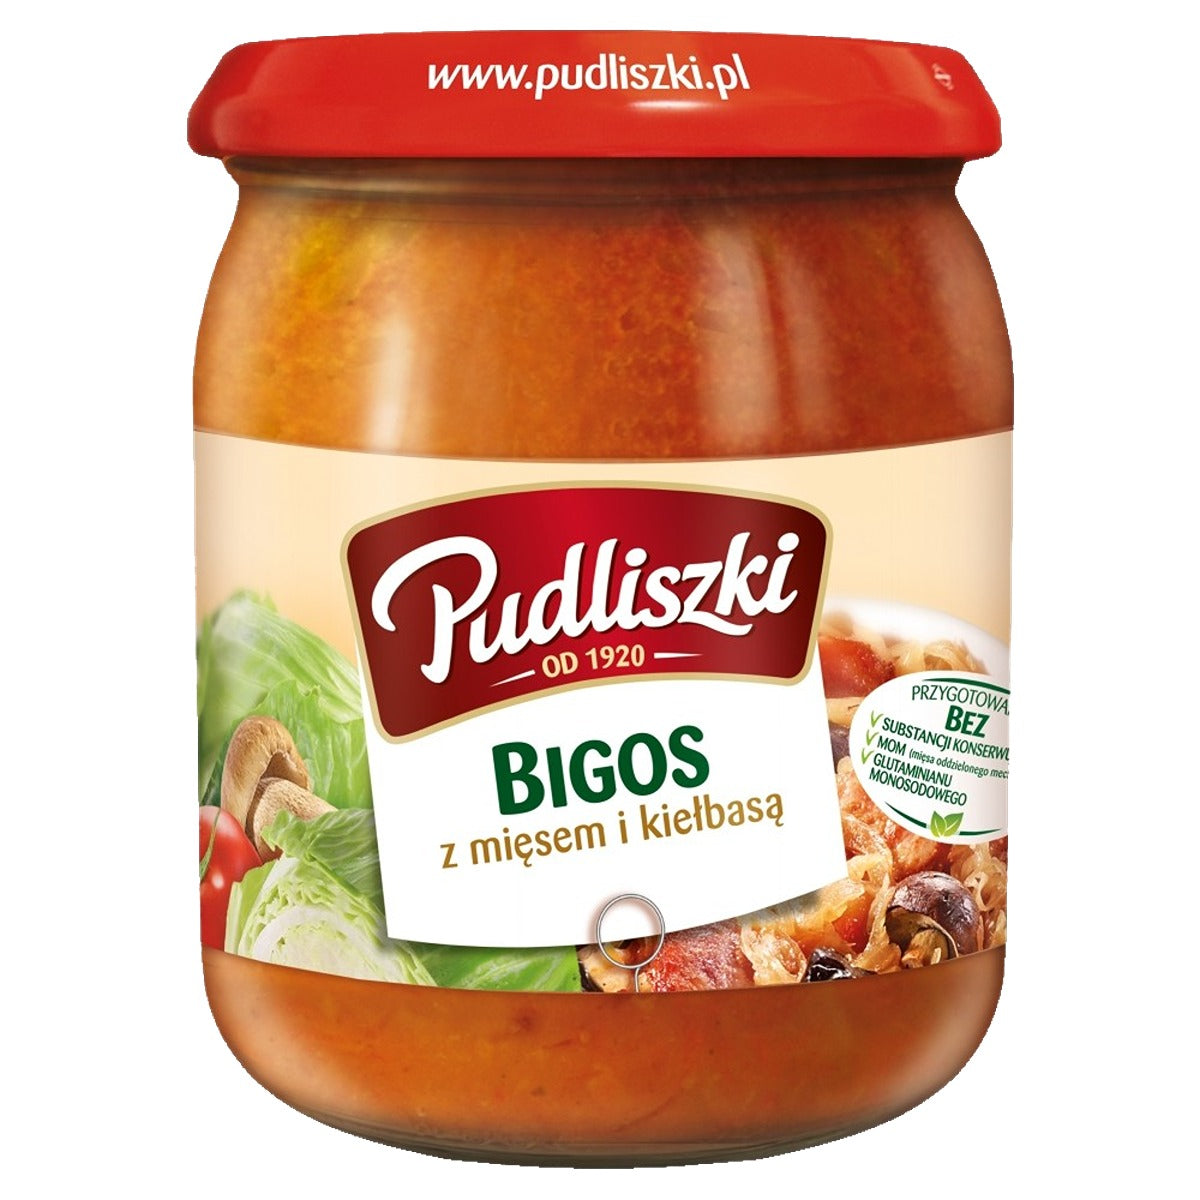 A jar of Pudliszki - Bigos Stewed Cabbage with Meat & Sausage - 500g on a white background.